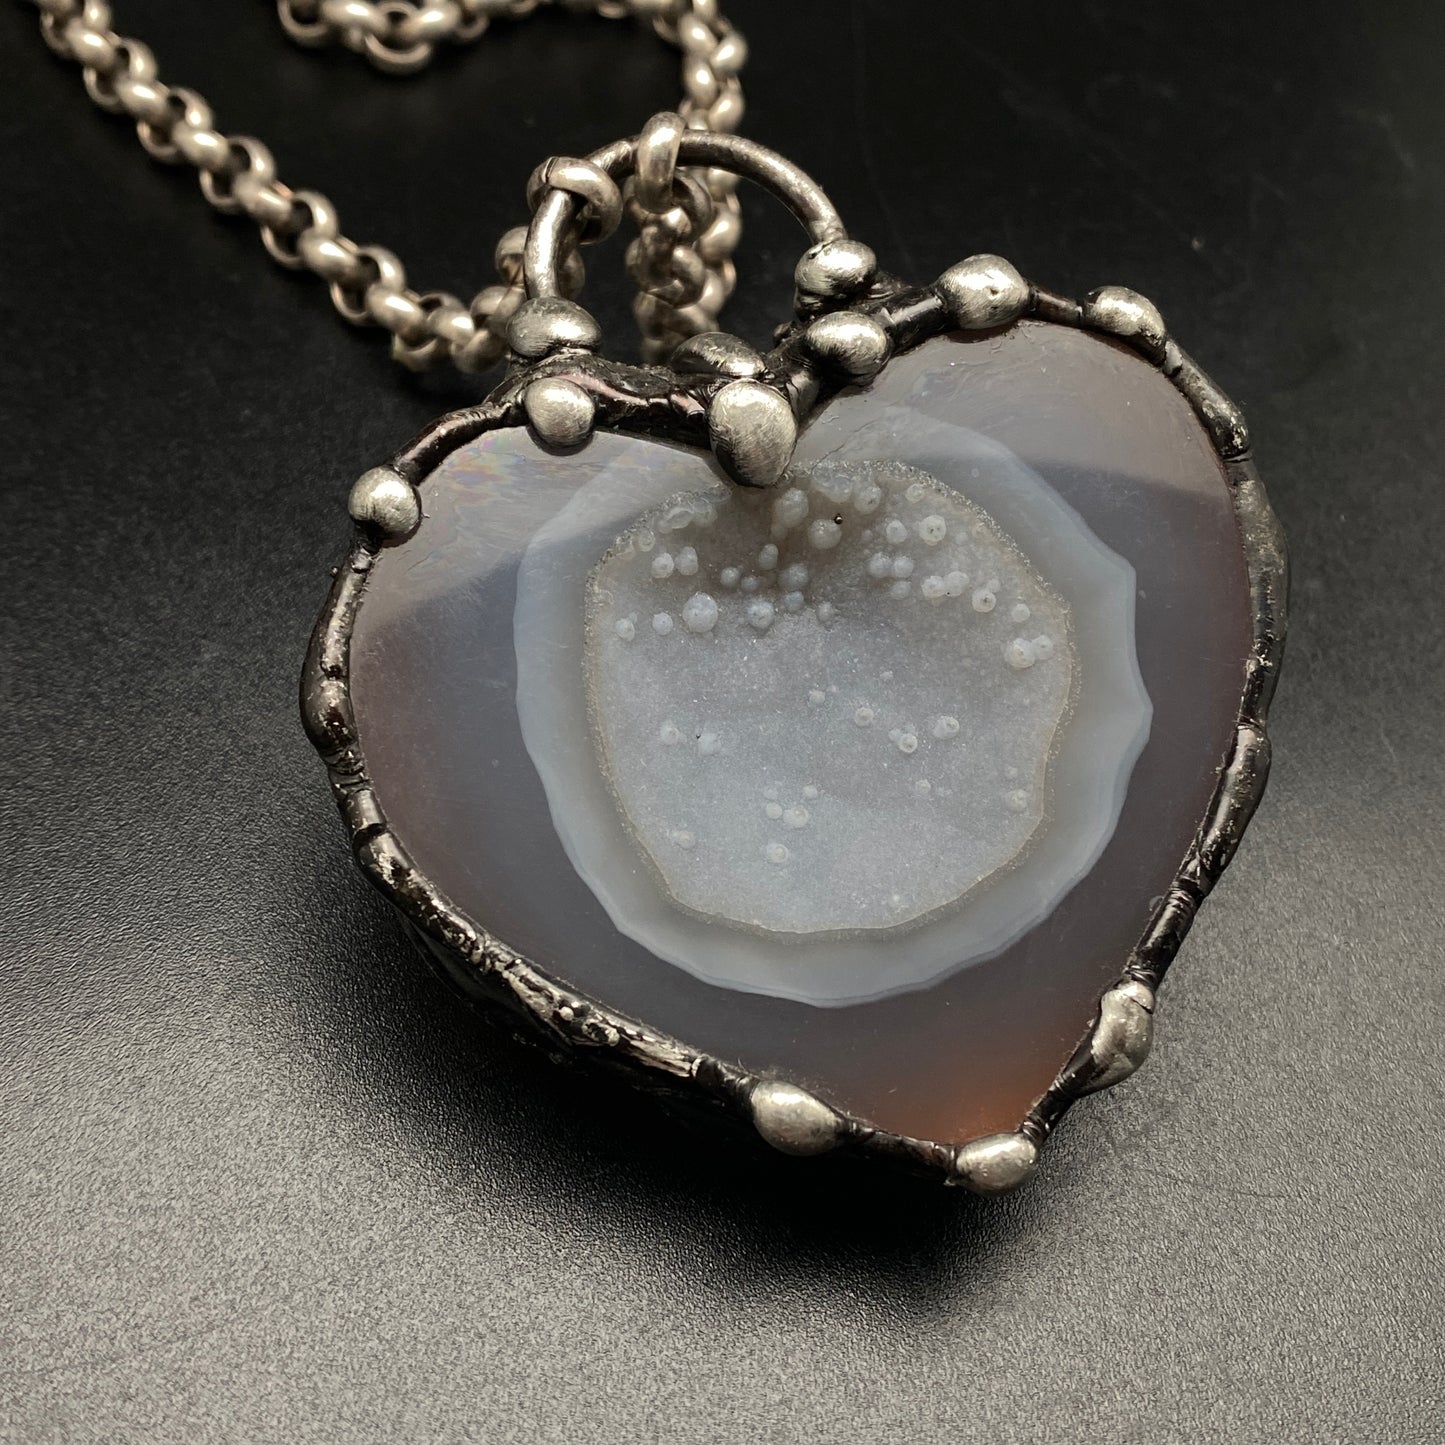 Trust ~ Speckled Agate Heart Necklace